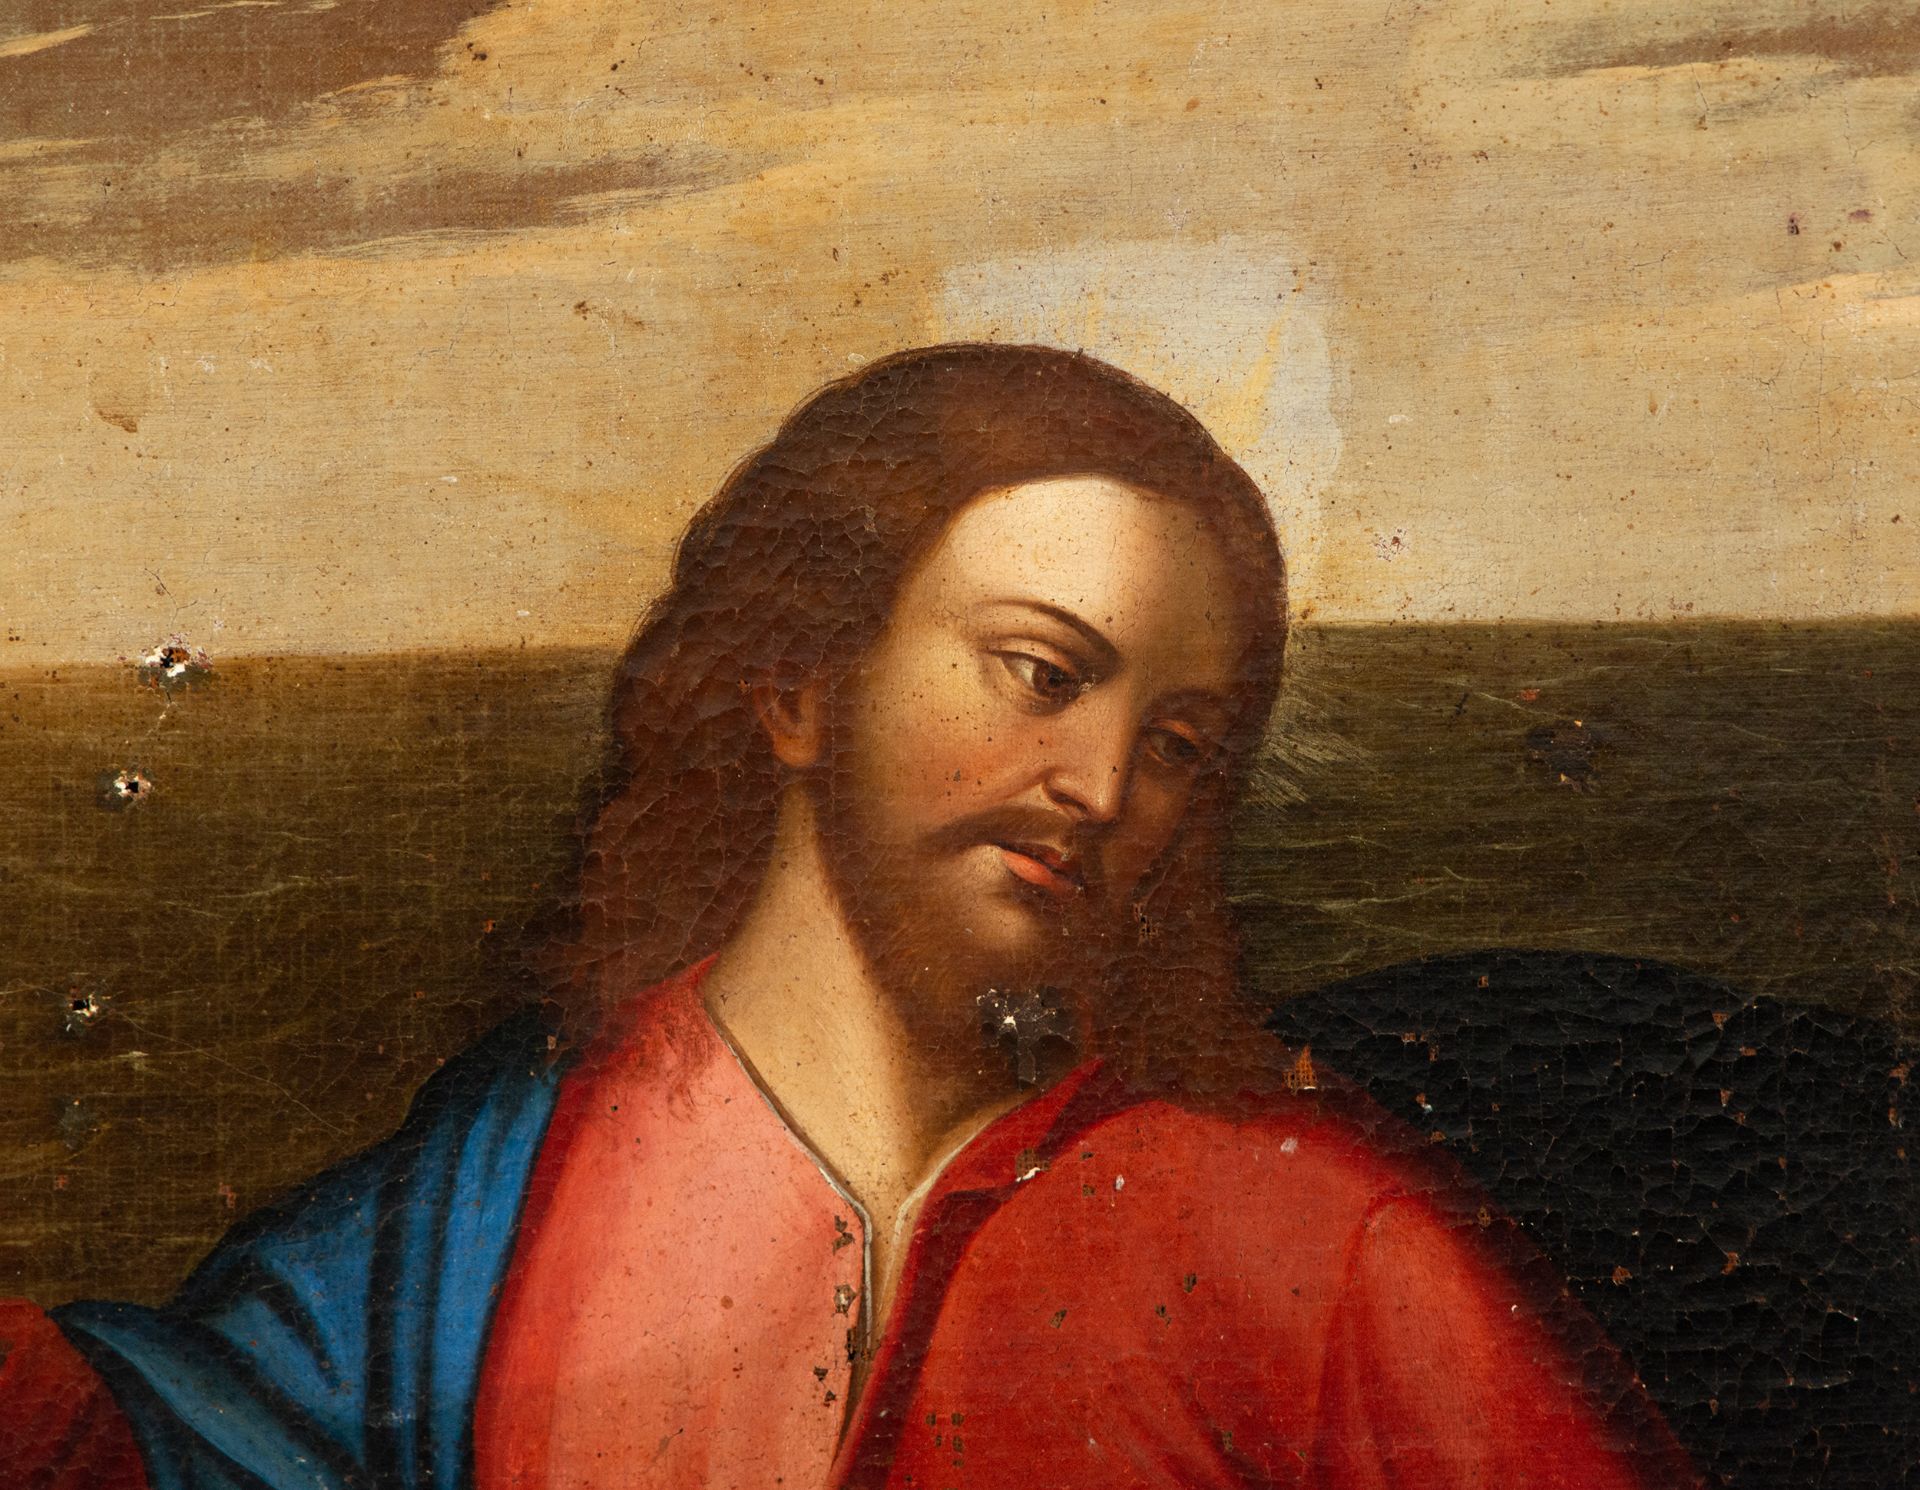 Jesus Saving Pedro from the Shipwreck, 17th century Viceroyalty colonial school - Image 5 of 6